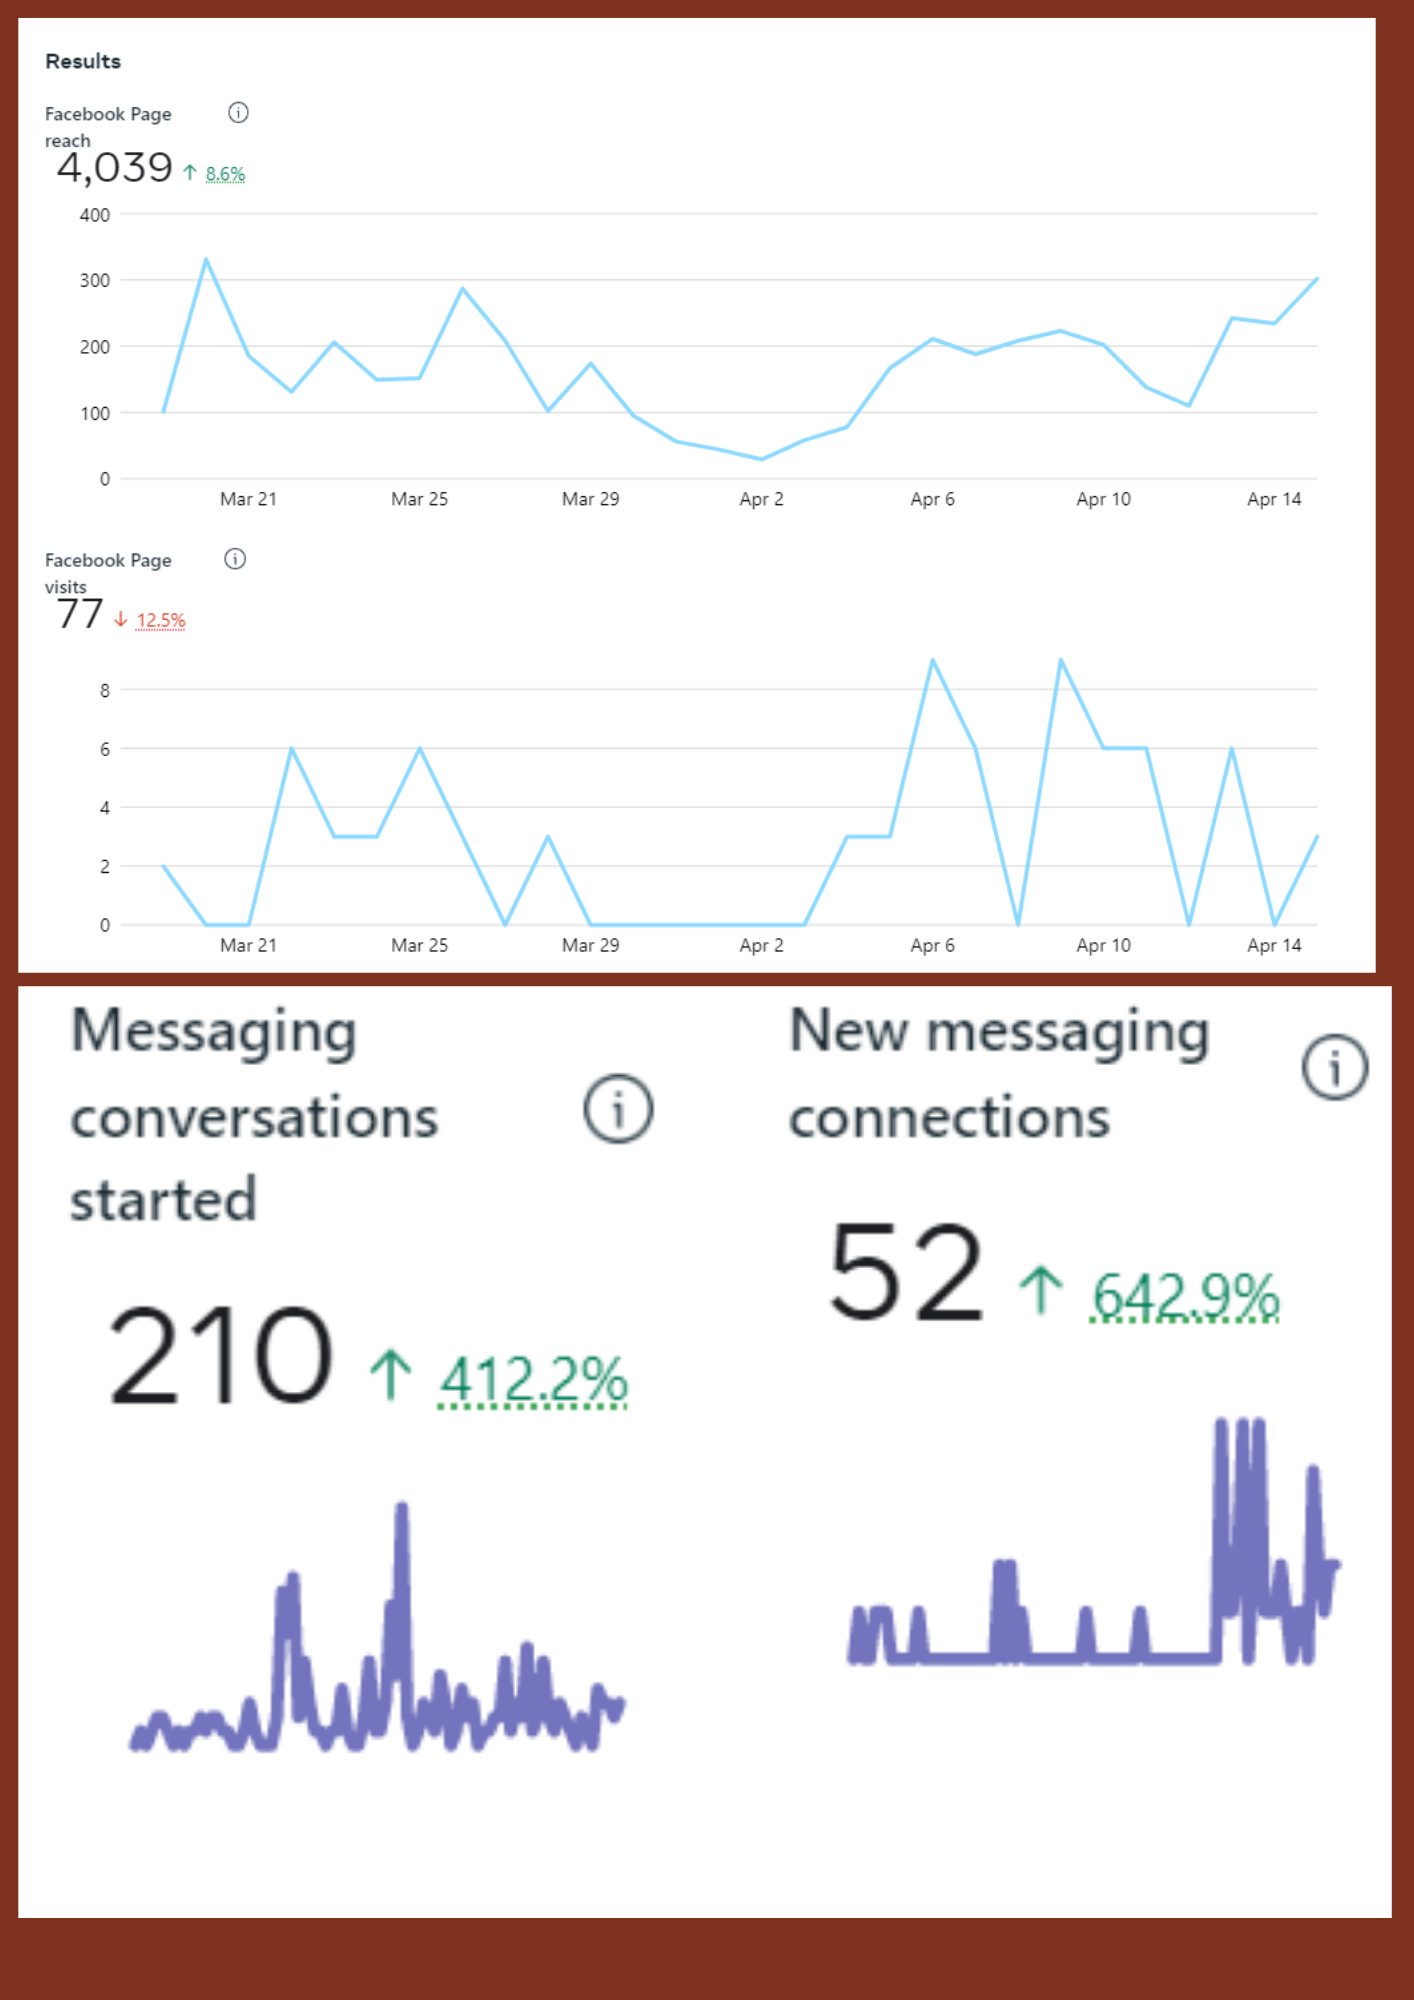 Results

Facebook Page

4.039 1.x

Facebook Page ®

77 d 12.5%

Messaging
conversations
started

New messaging
connections

52 + 429%